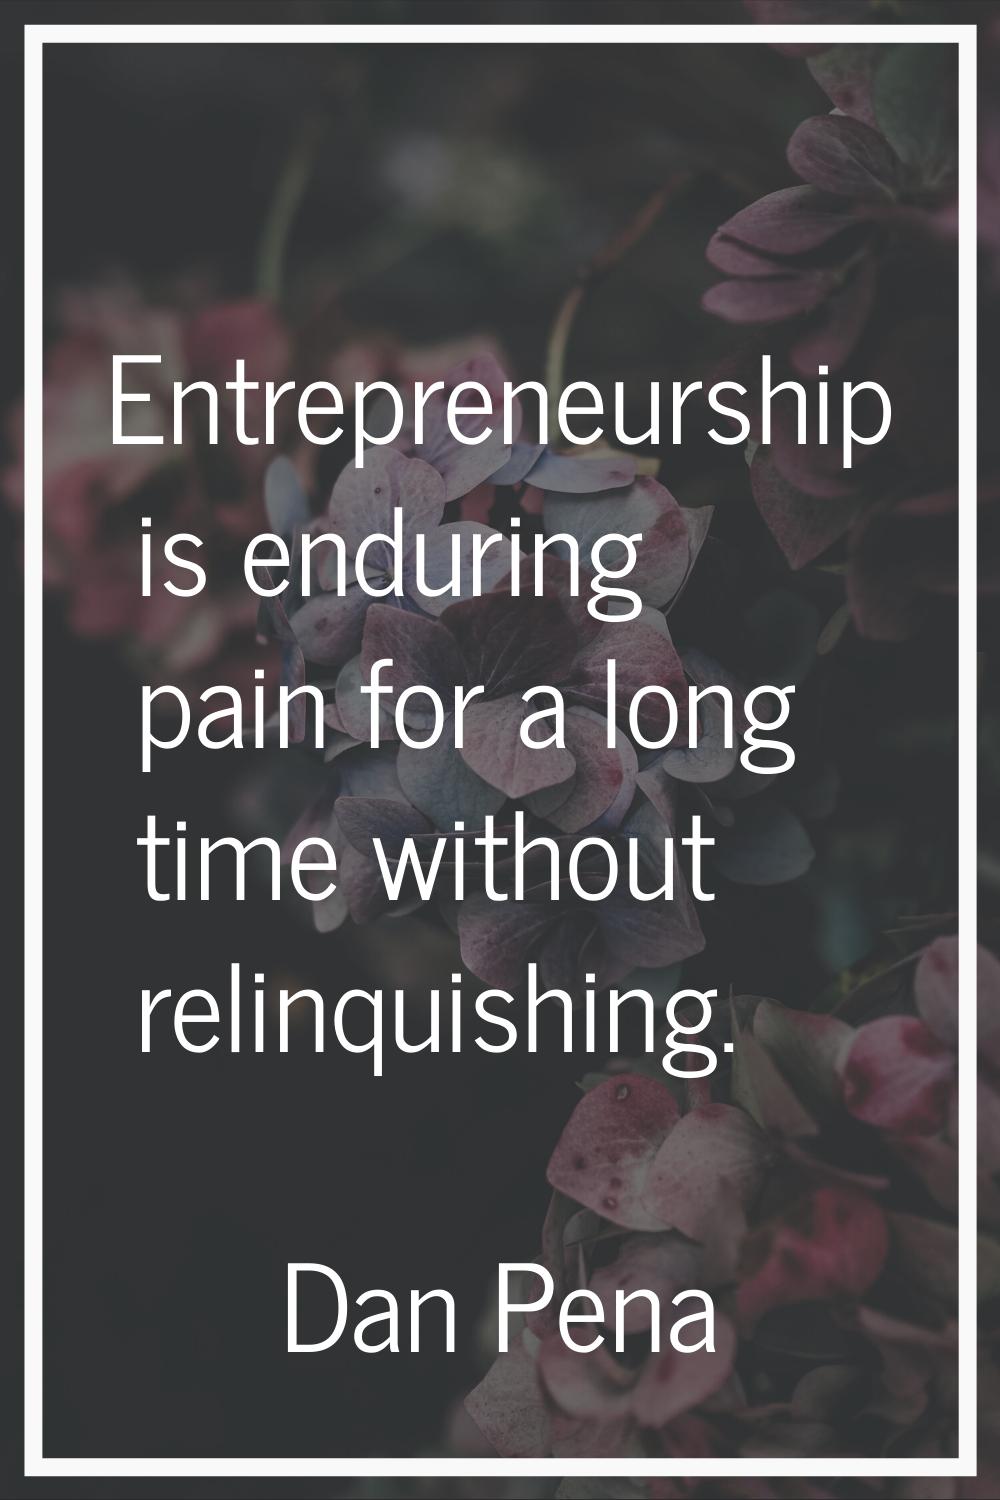 Entrepreneurship is enduring pain for a long time without relinquishing.